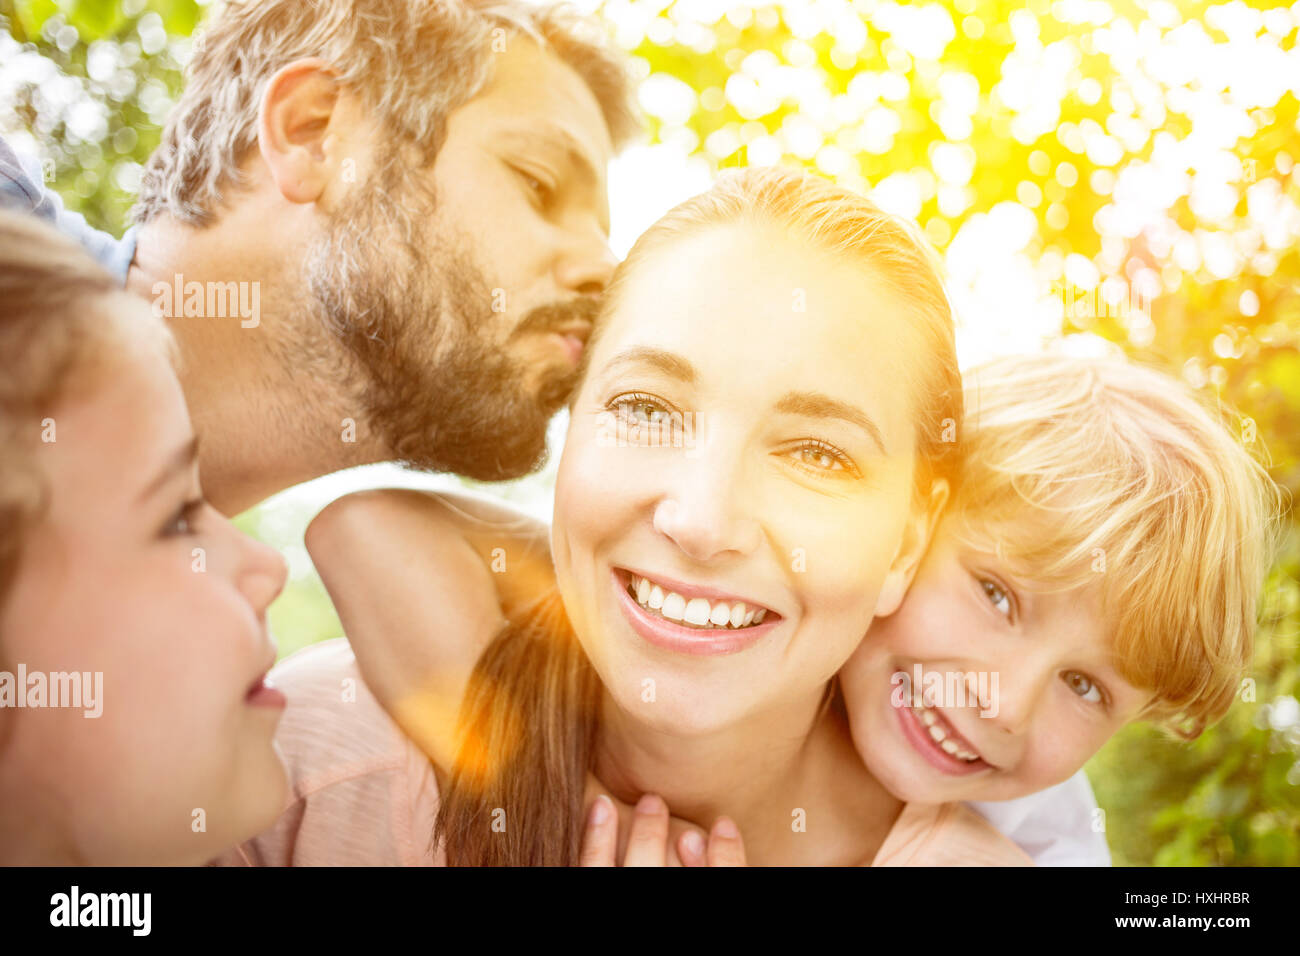 Family love with parents kissing and hugging their children Stock Photo